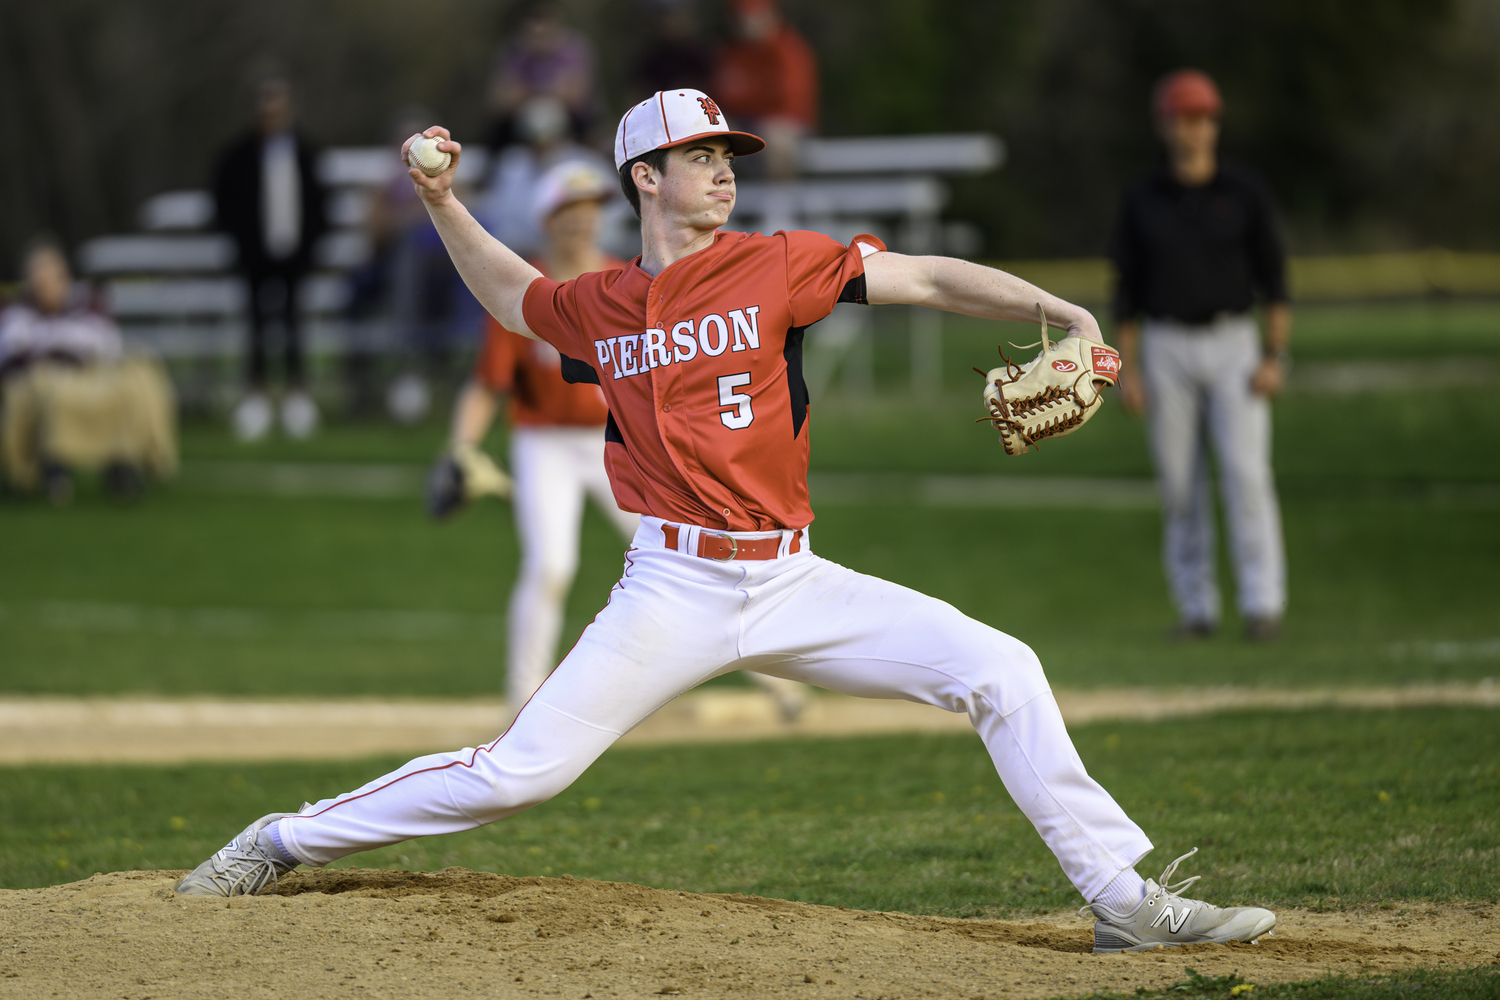 Pierson senior Nathan Dee pitched a 1-2-3 ninth inning for the save on Monday.  MARIANNE BARNETT